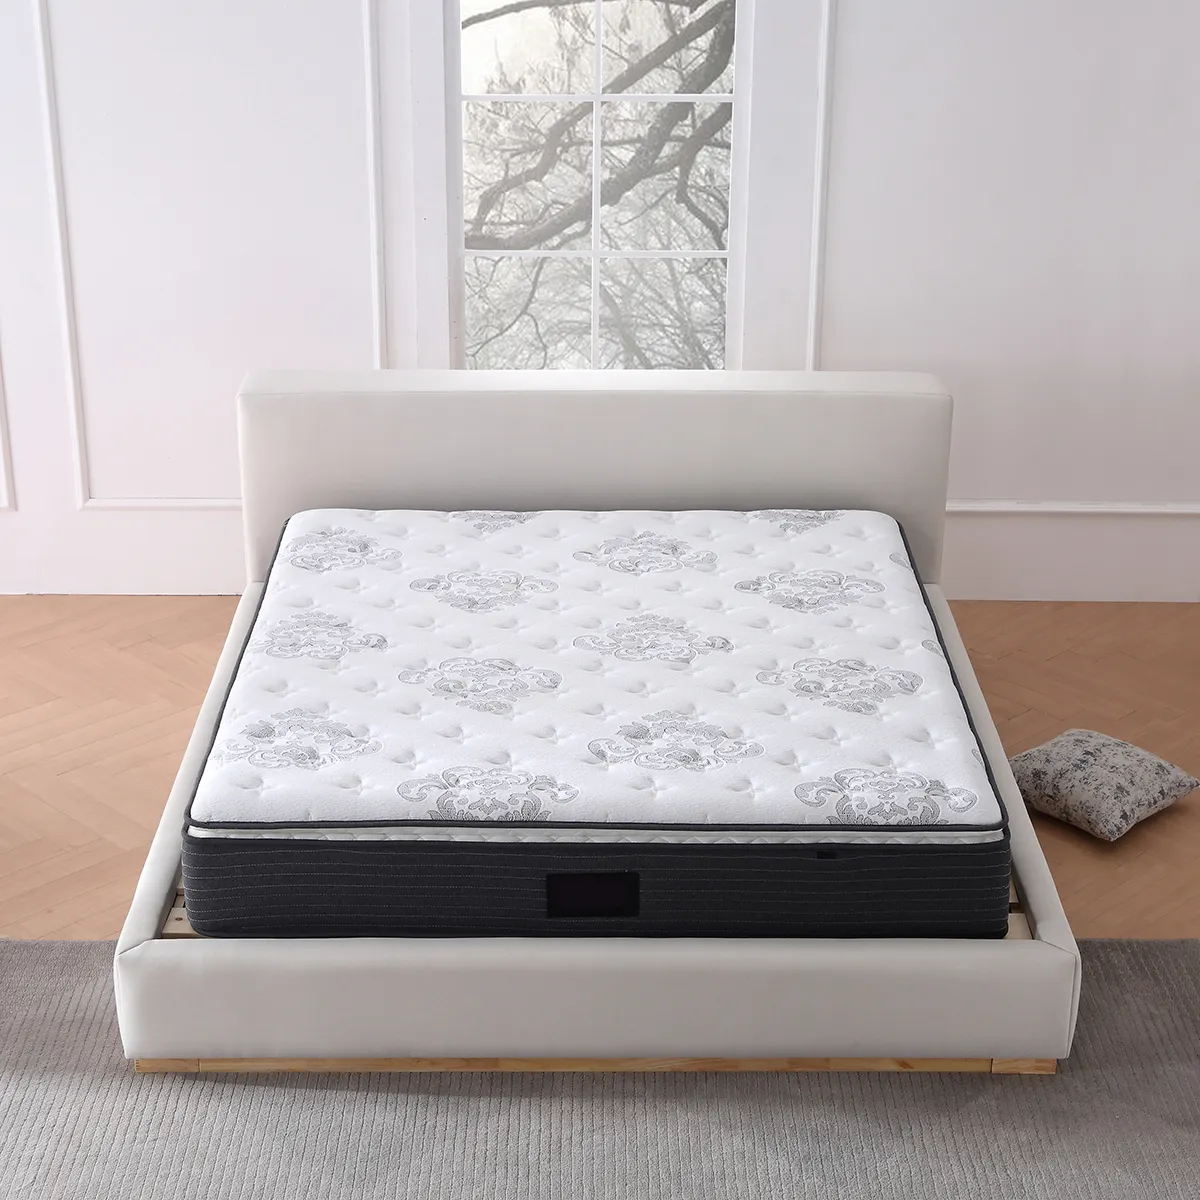 Mobili per la <span class=keywords><strong>casa</strong></span> molle insacchettate Gel Memory Foam Queen King Size <span class=keywords><strong>camera</strong></span> <span class=keywords><strong>da</strong></span> <span class=keywords><strong>letto</strong></span> cuscino superiore <span class=keywords><strong>materasso</strong></span> In scatola